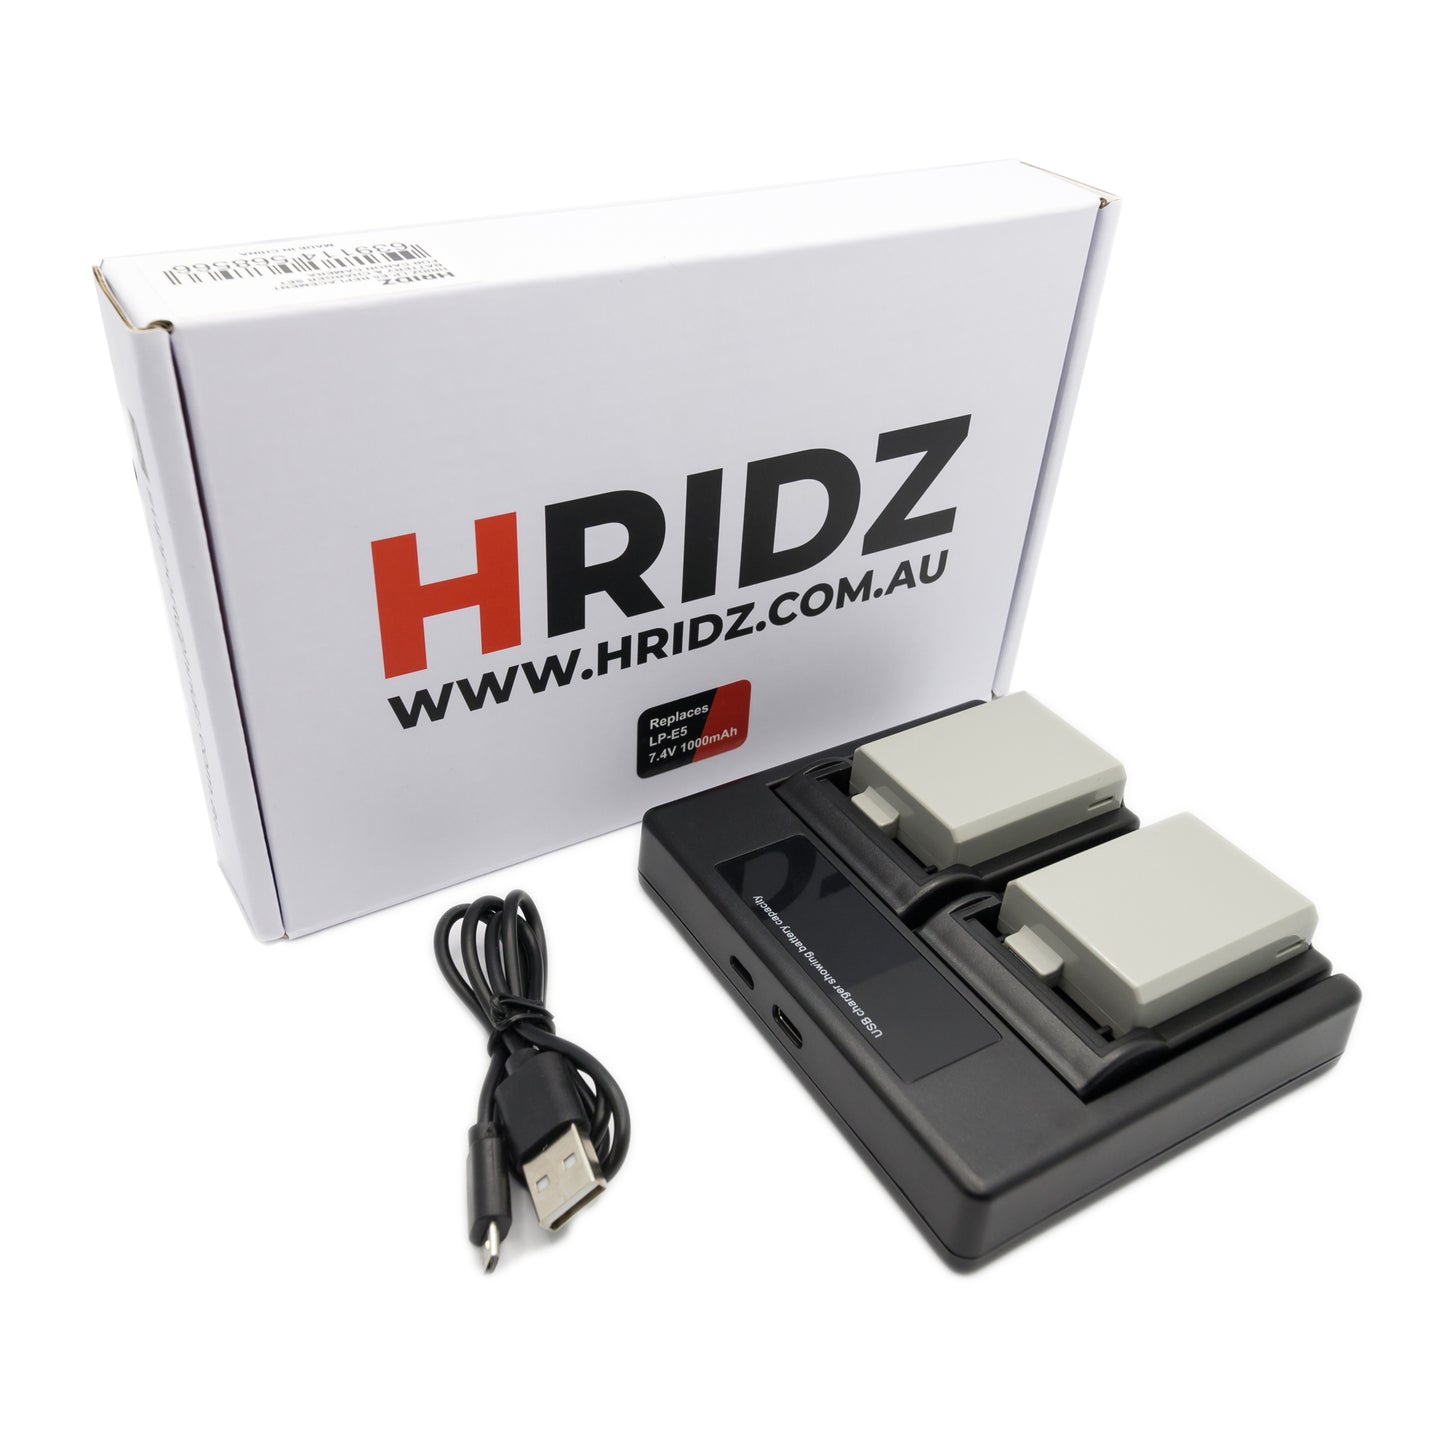 Hridz LP-E5 Battery Pack for Canon EOS Rebel and Kiss Cameras (100% Compatible with Original)